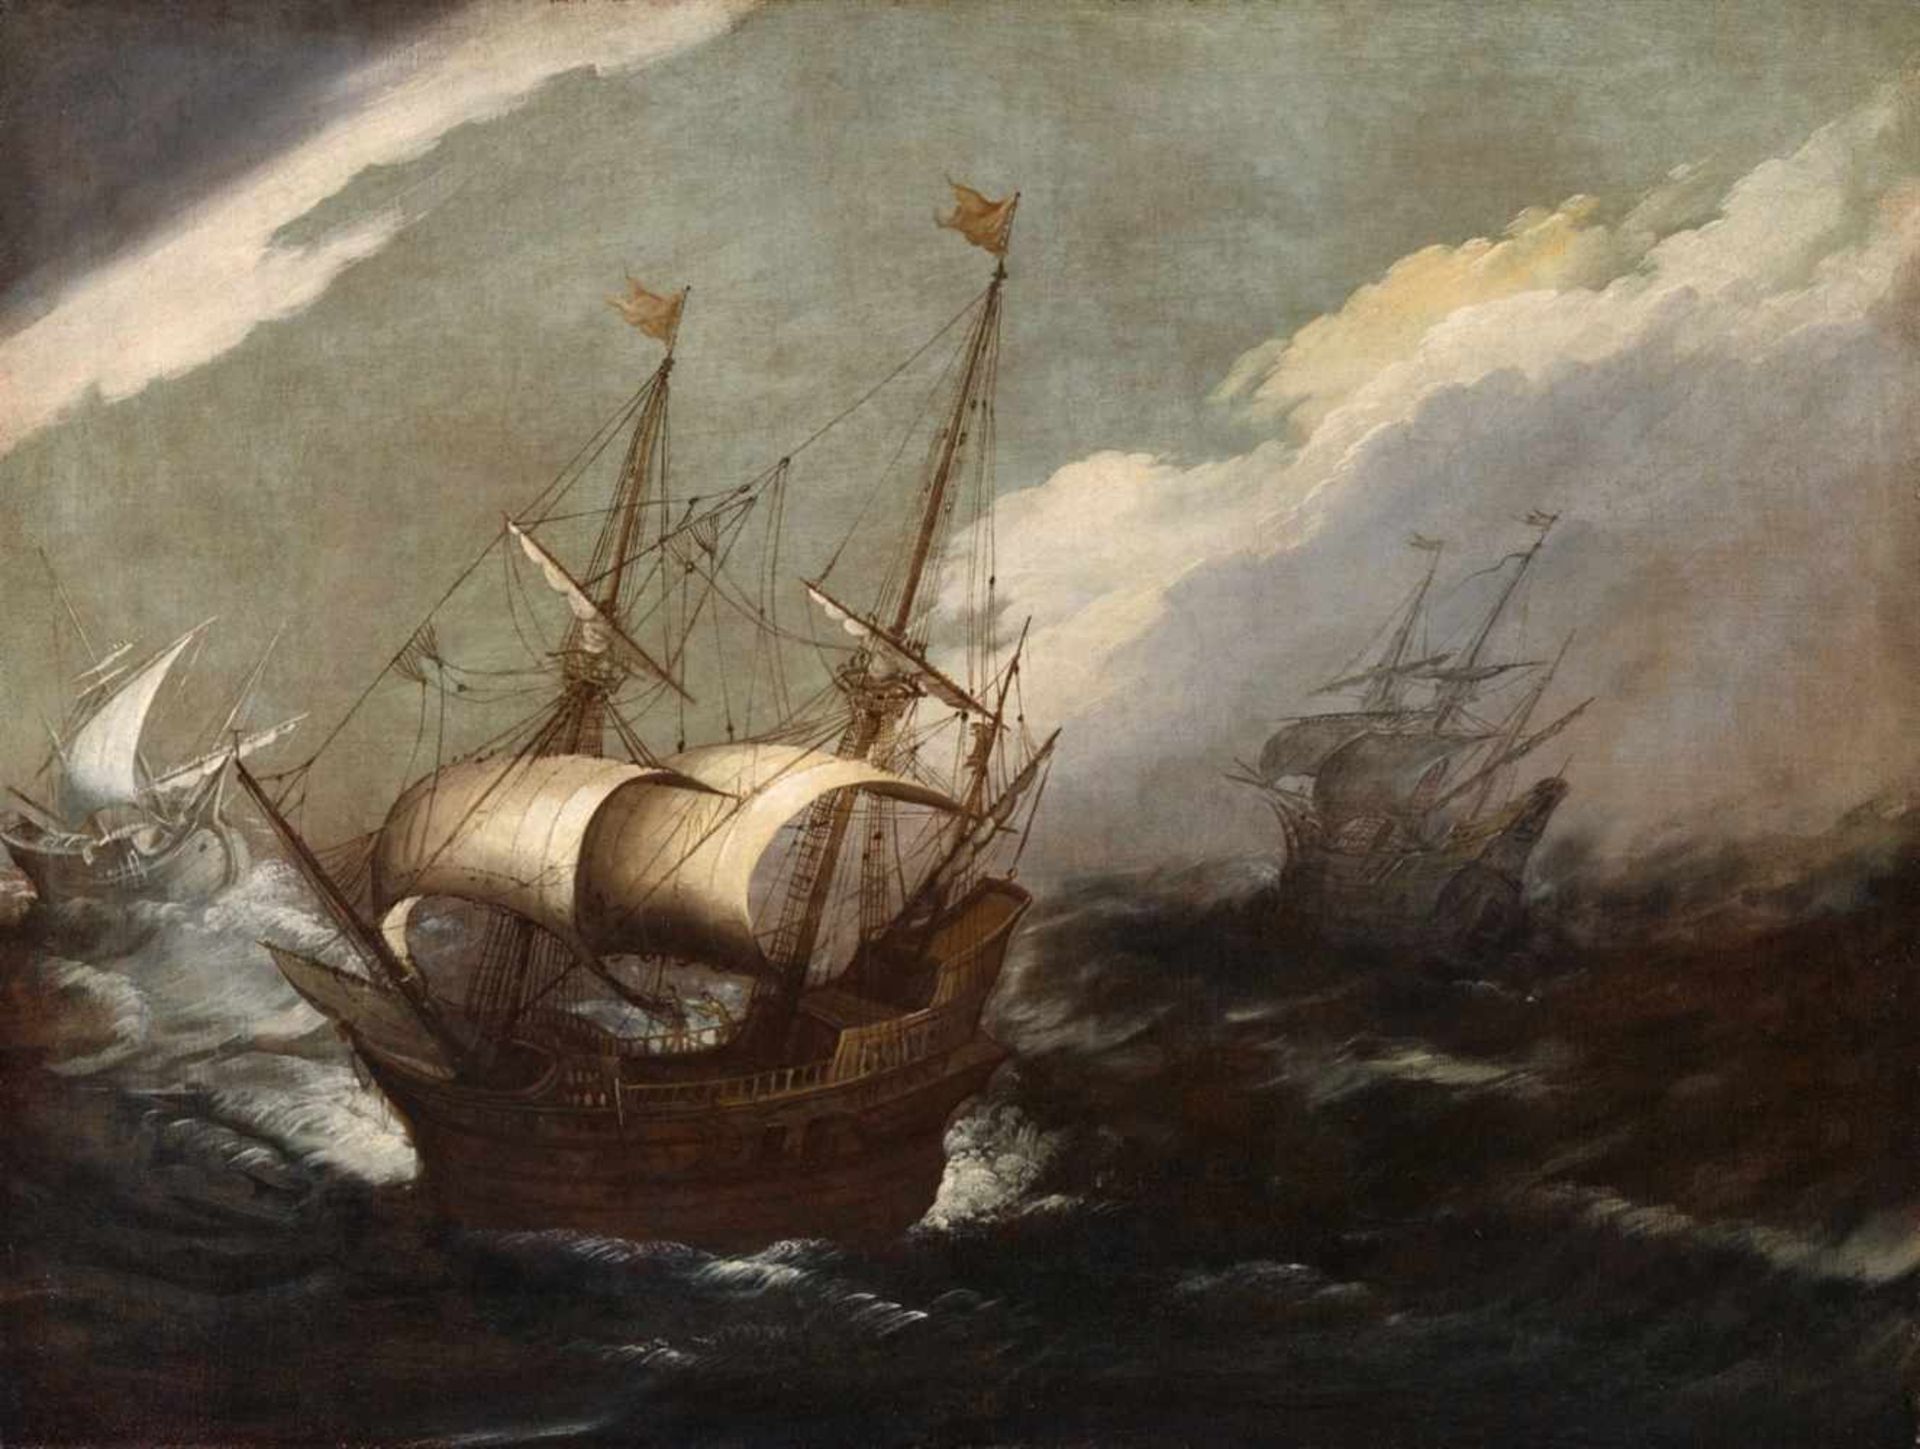 Flemish School, circa 1600Ships on Rough SeasOil on canvas. 73 x 96 cm.The author of this painting